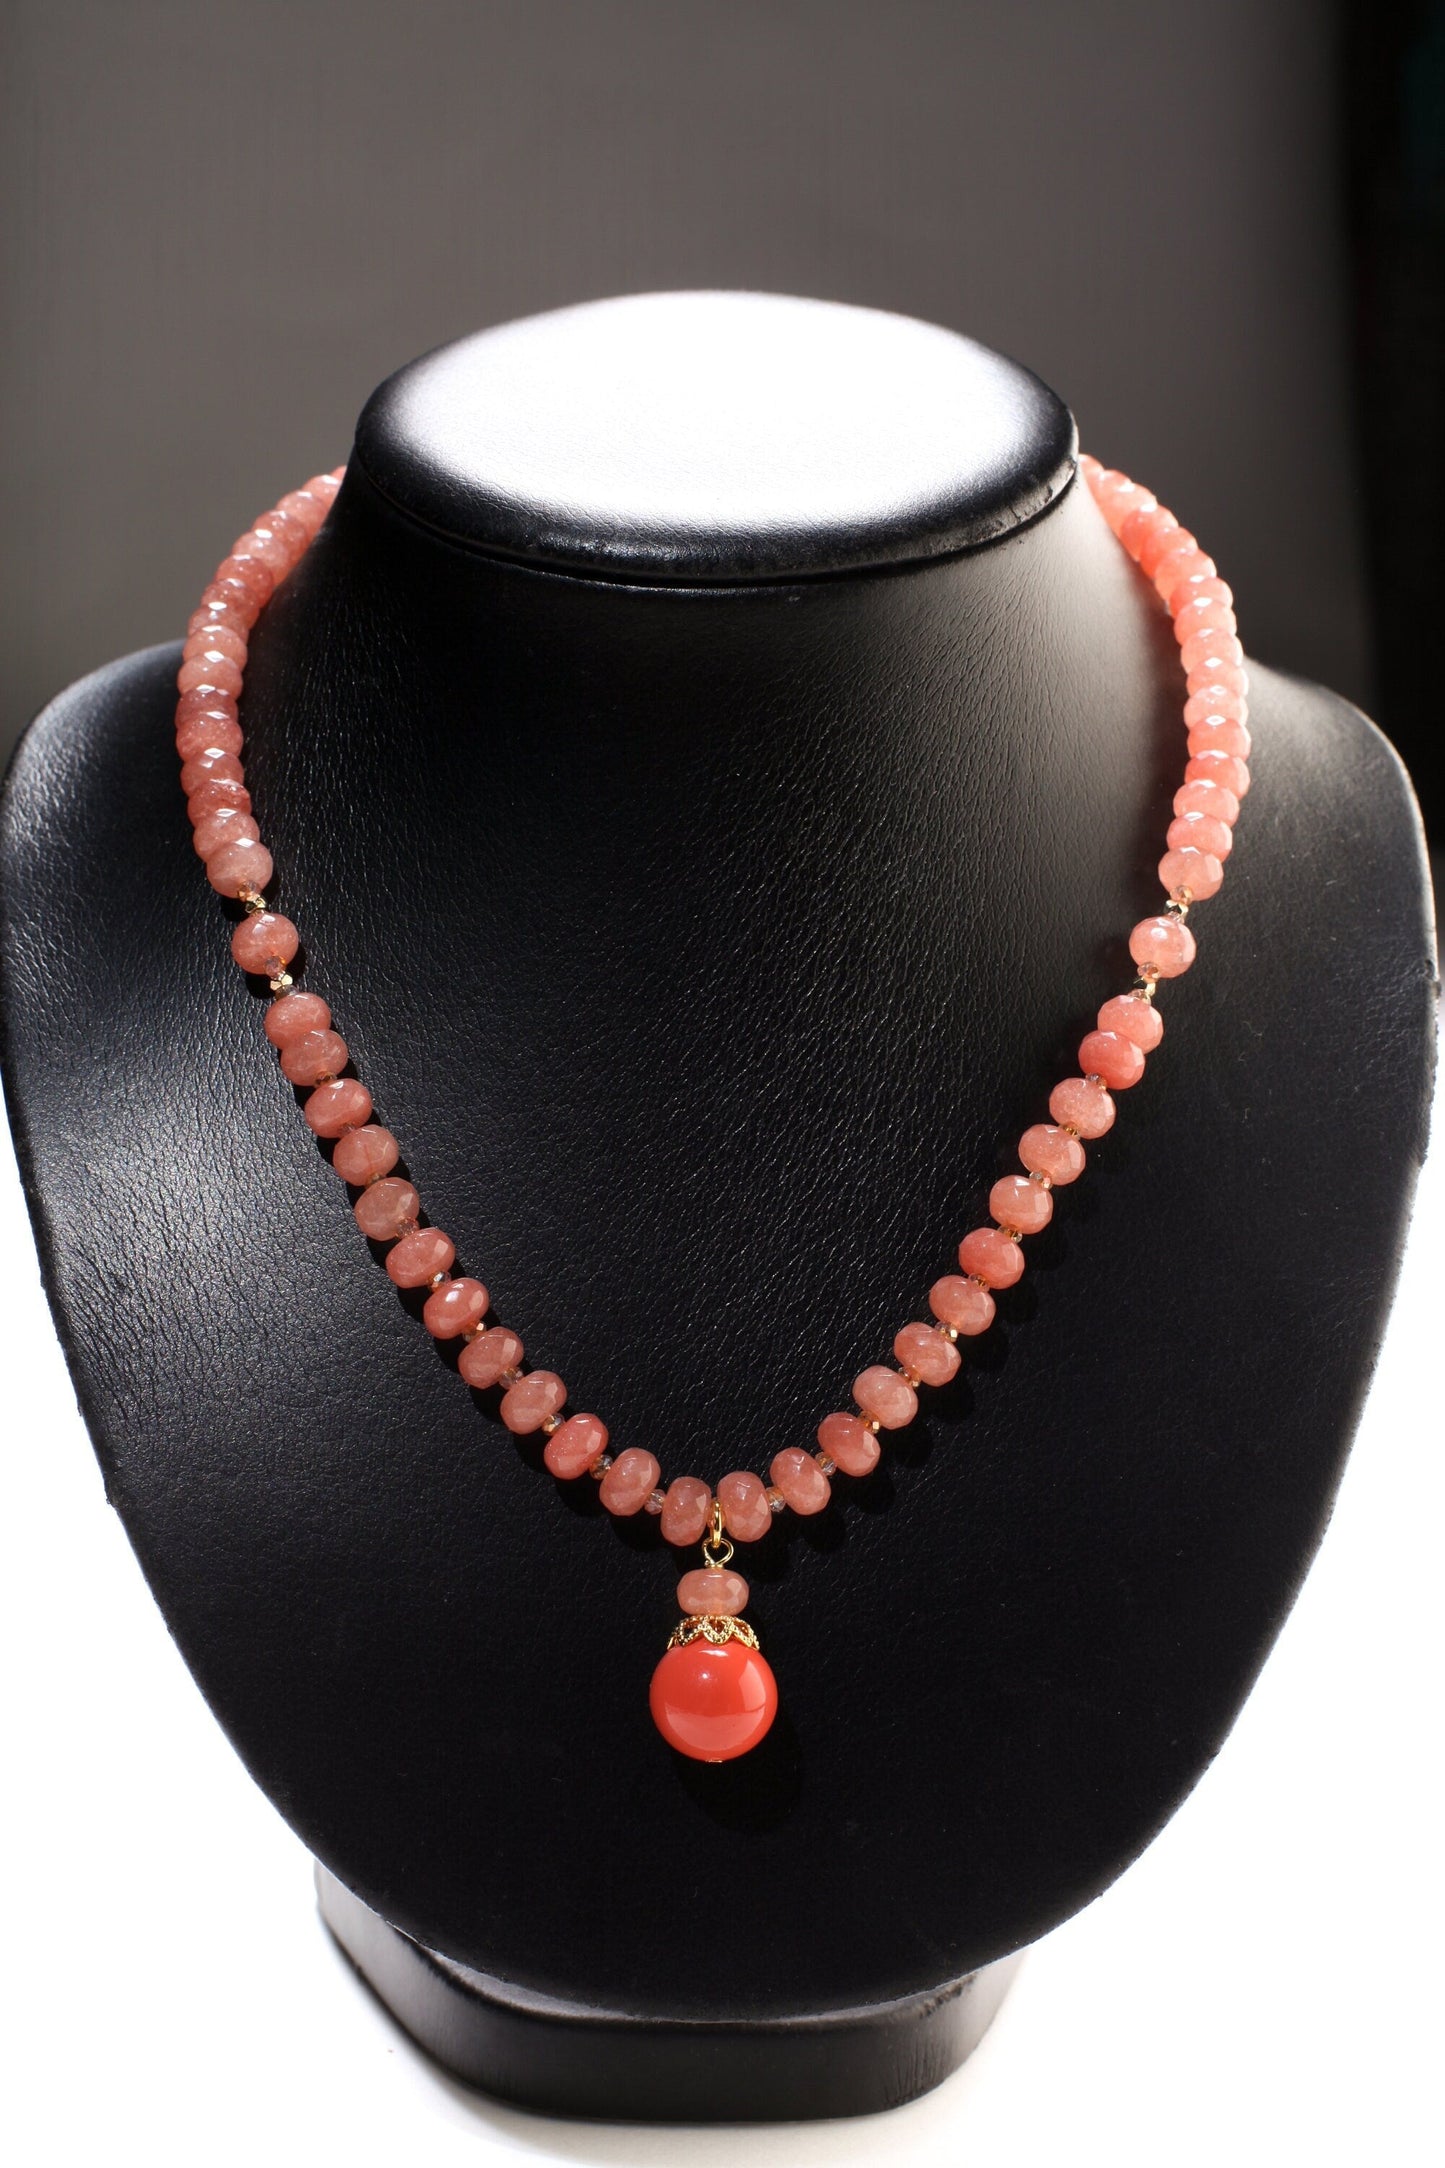 Peach Aventurine Faceted Rondelle Necklace with Salmon South Sea Seashell Pearl Pendant 17.5&quot; Gold Necklace +2&quot; Extension Chain